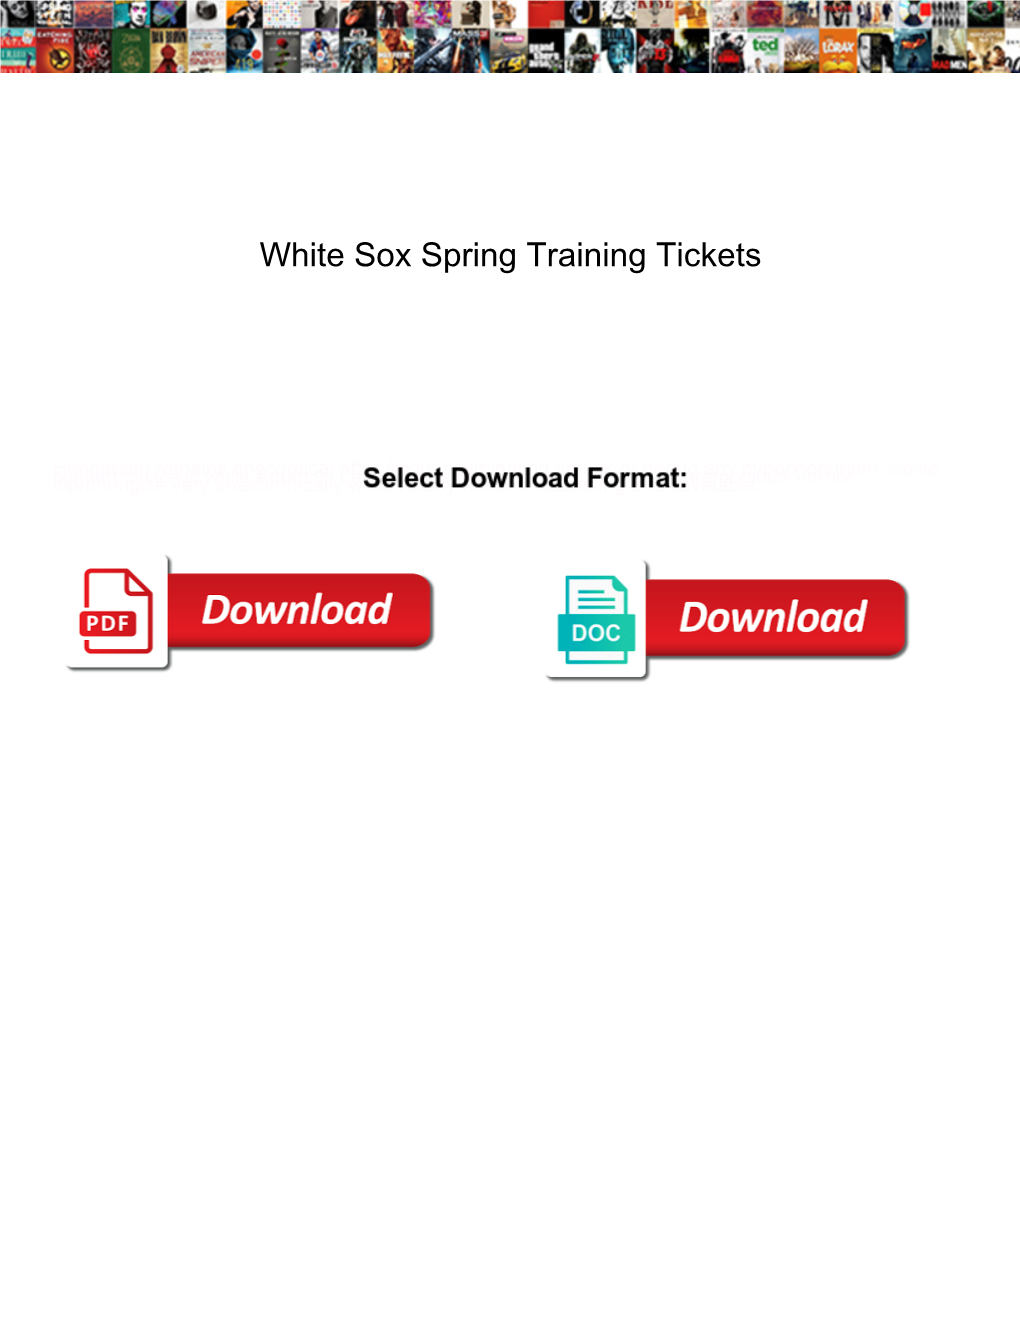 White Sox Spring Training Tickets